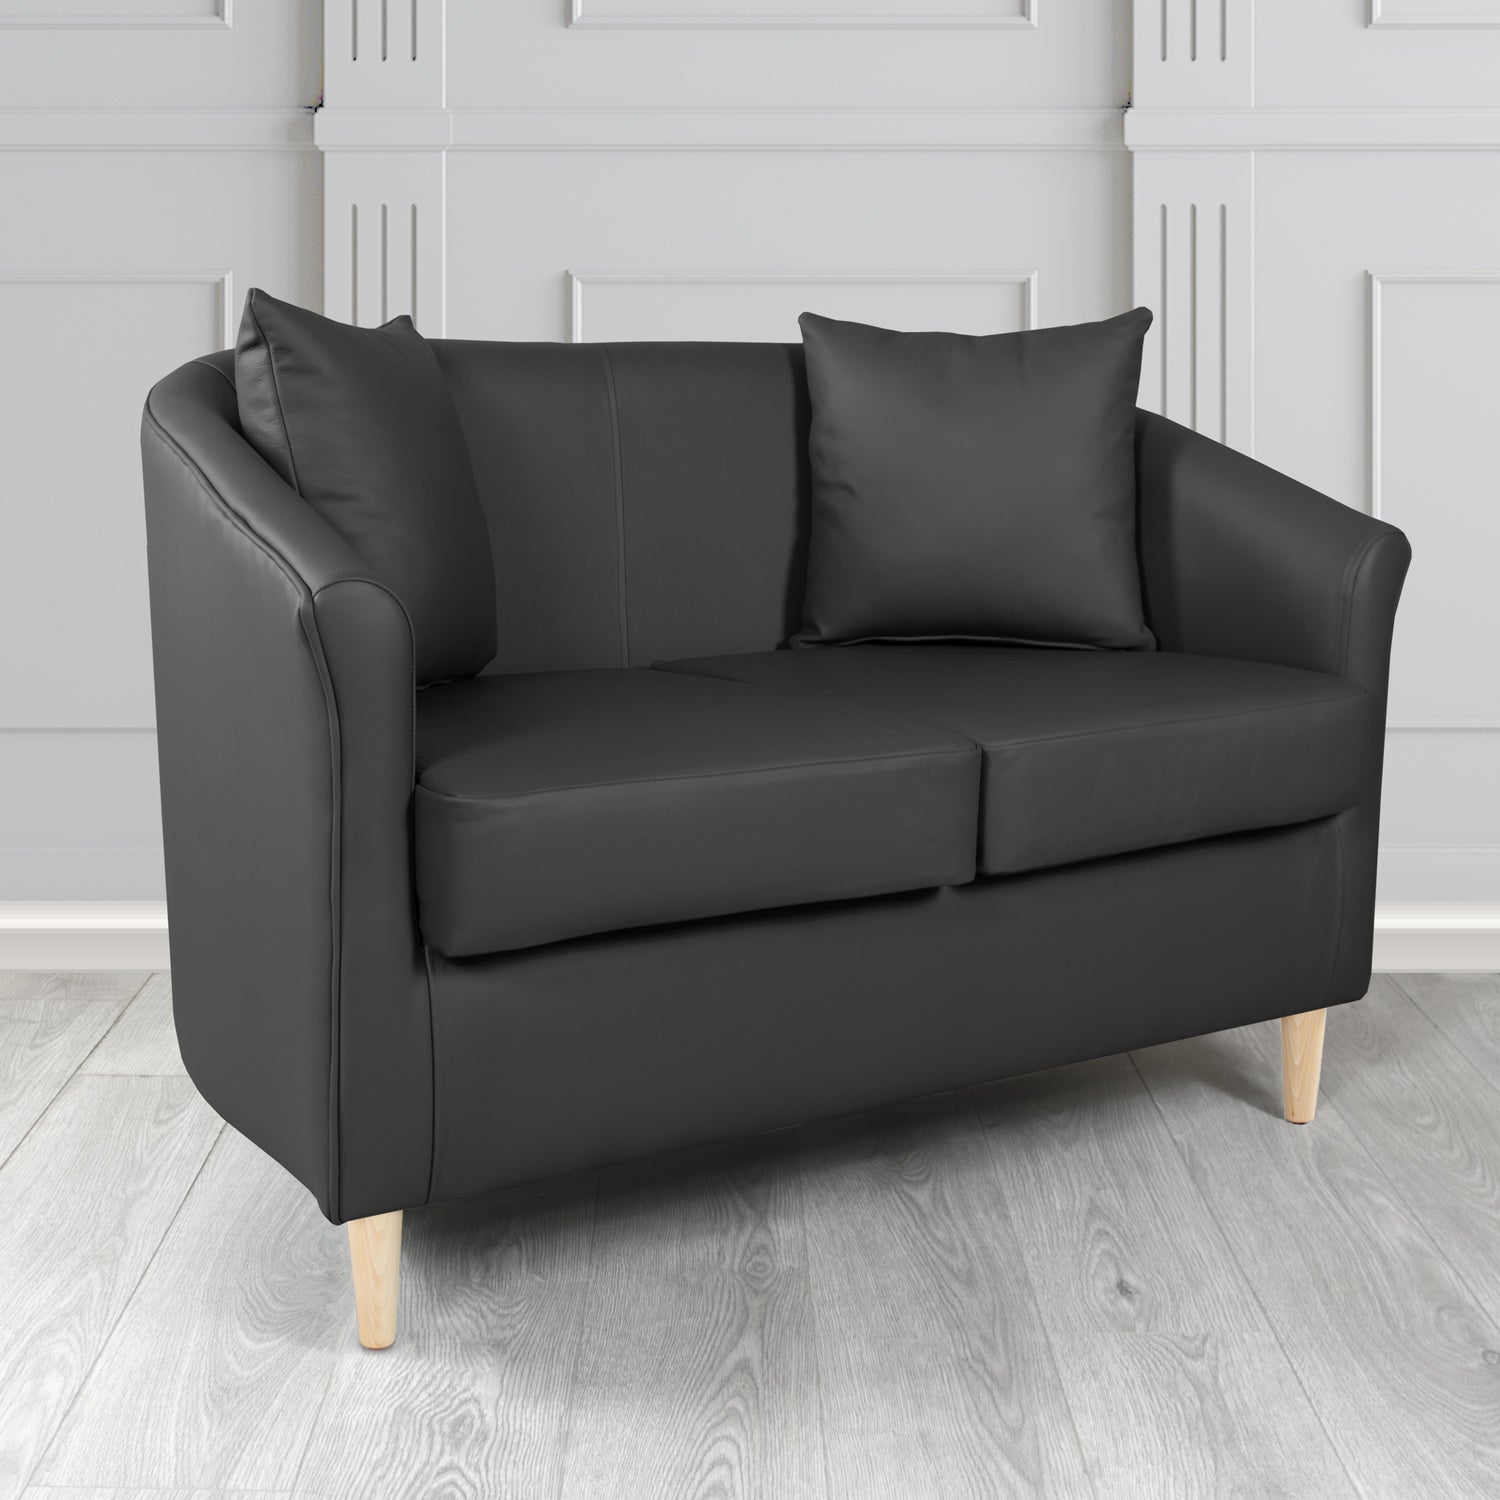 St Tropez Shelly Black Crib 5 Genuine Leather 2 Seater Tub Sofa with Scatter Cushions - The Tub Chair Shop